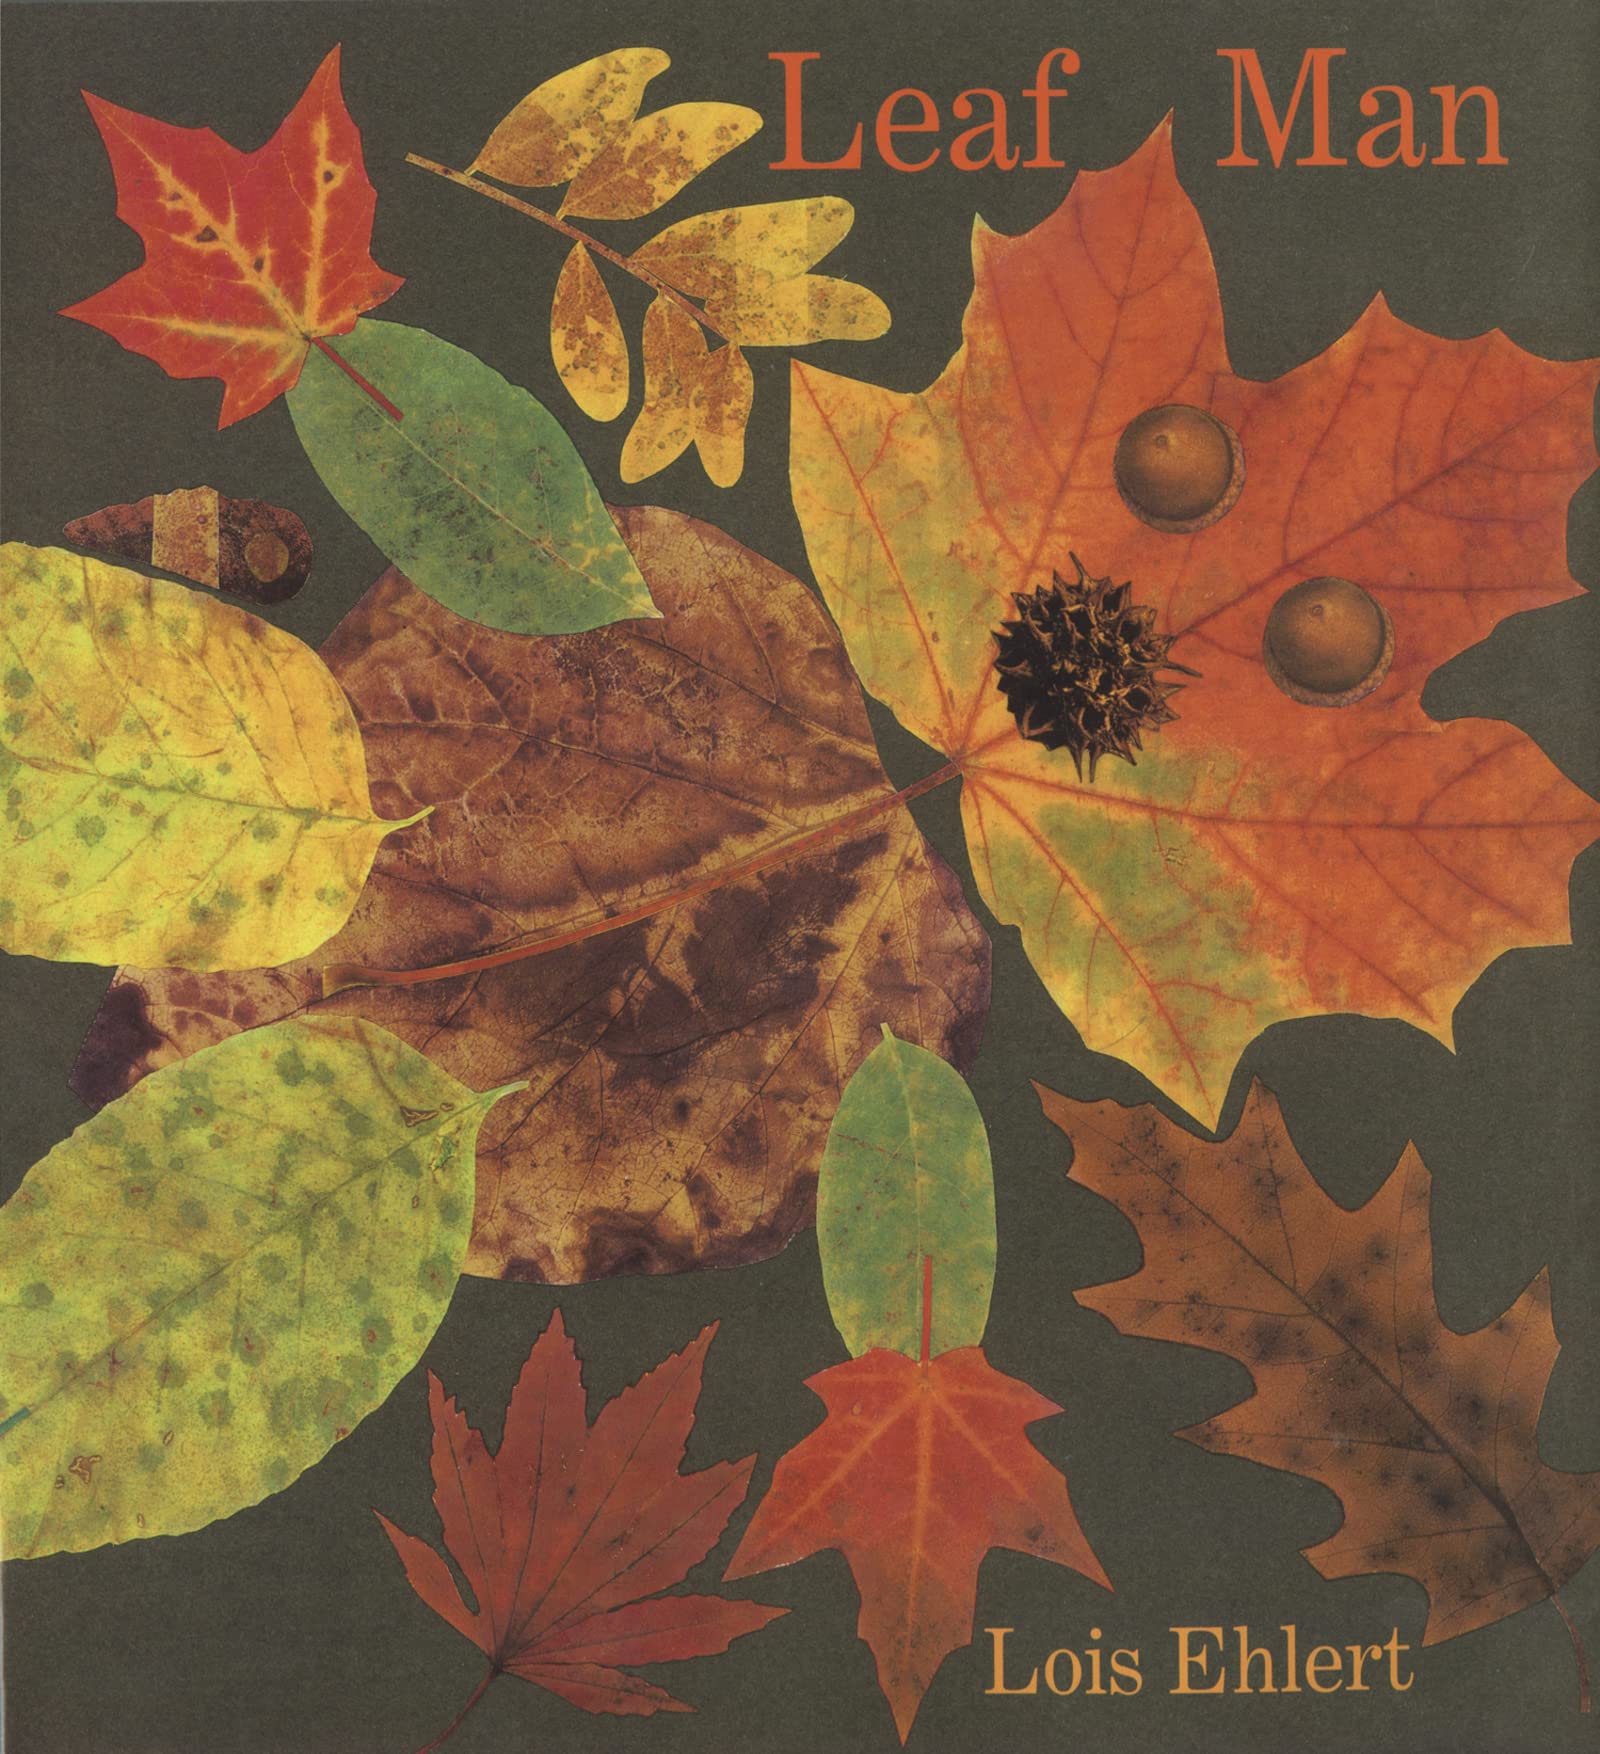 speech and language teaching concepts for Leaf Man in speech therapy​ ​